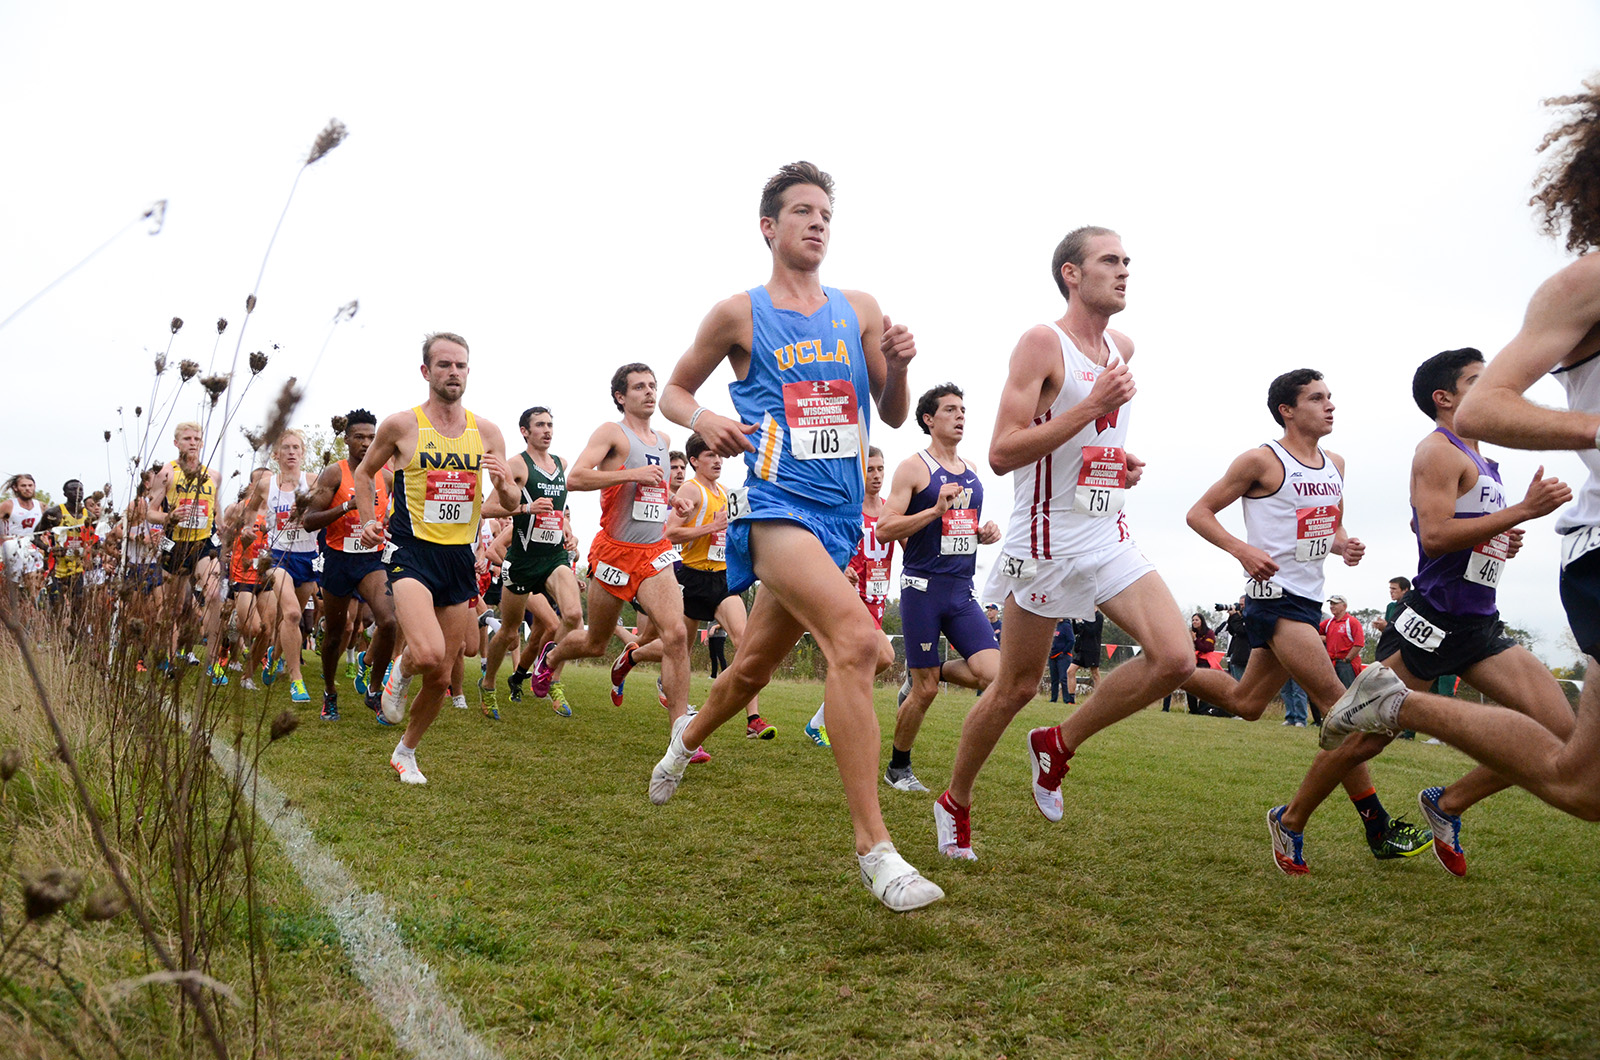 How Do You Qualify For National Champiosnhip In Cross Country